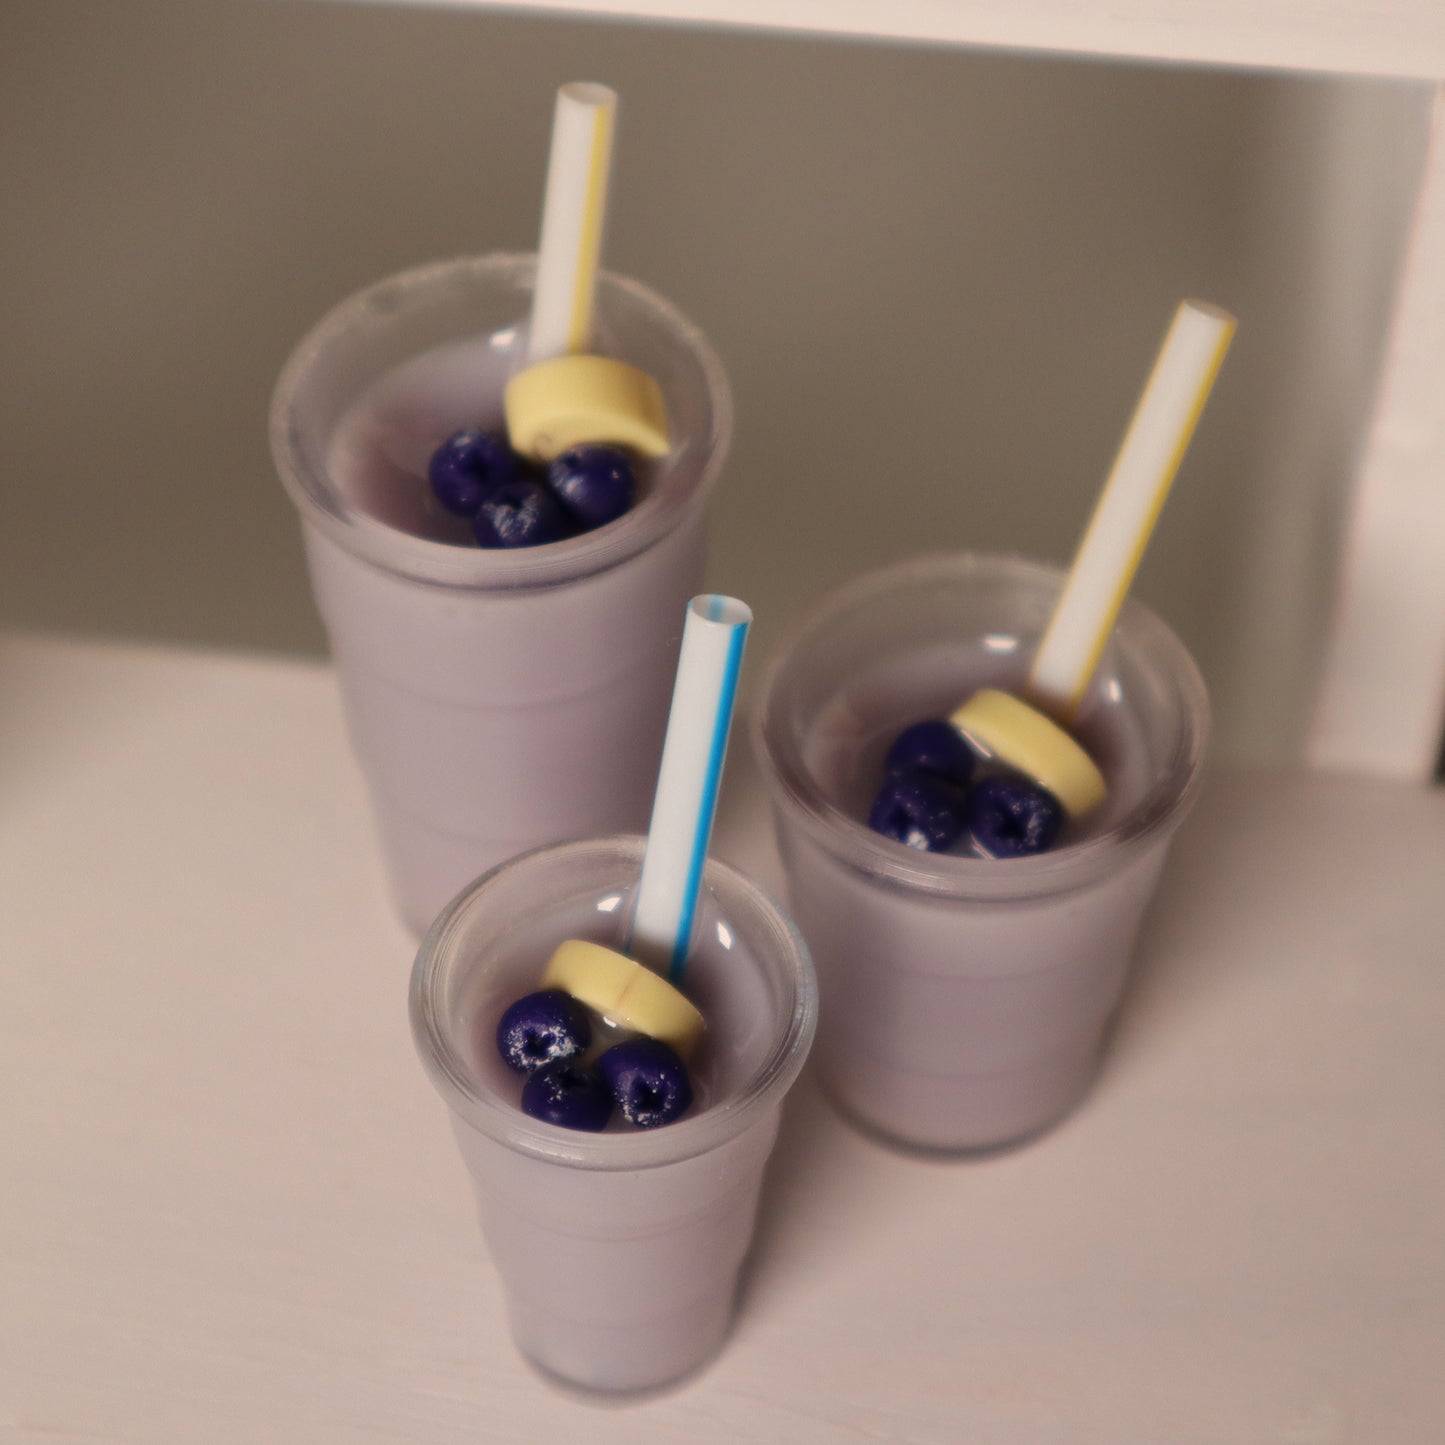 1/3 & 1/4 scale props for BJDs - To Go Cup - Smoothies - 3 sizes, 6 flavors